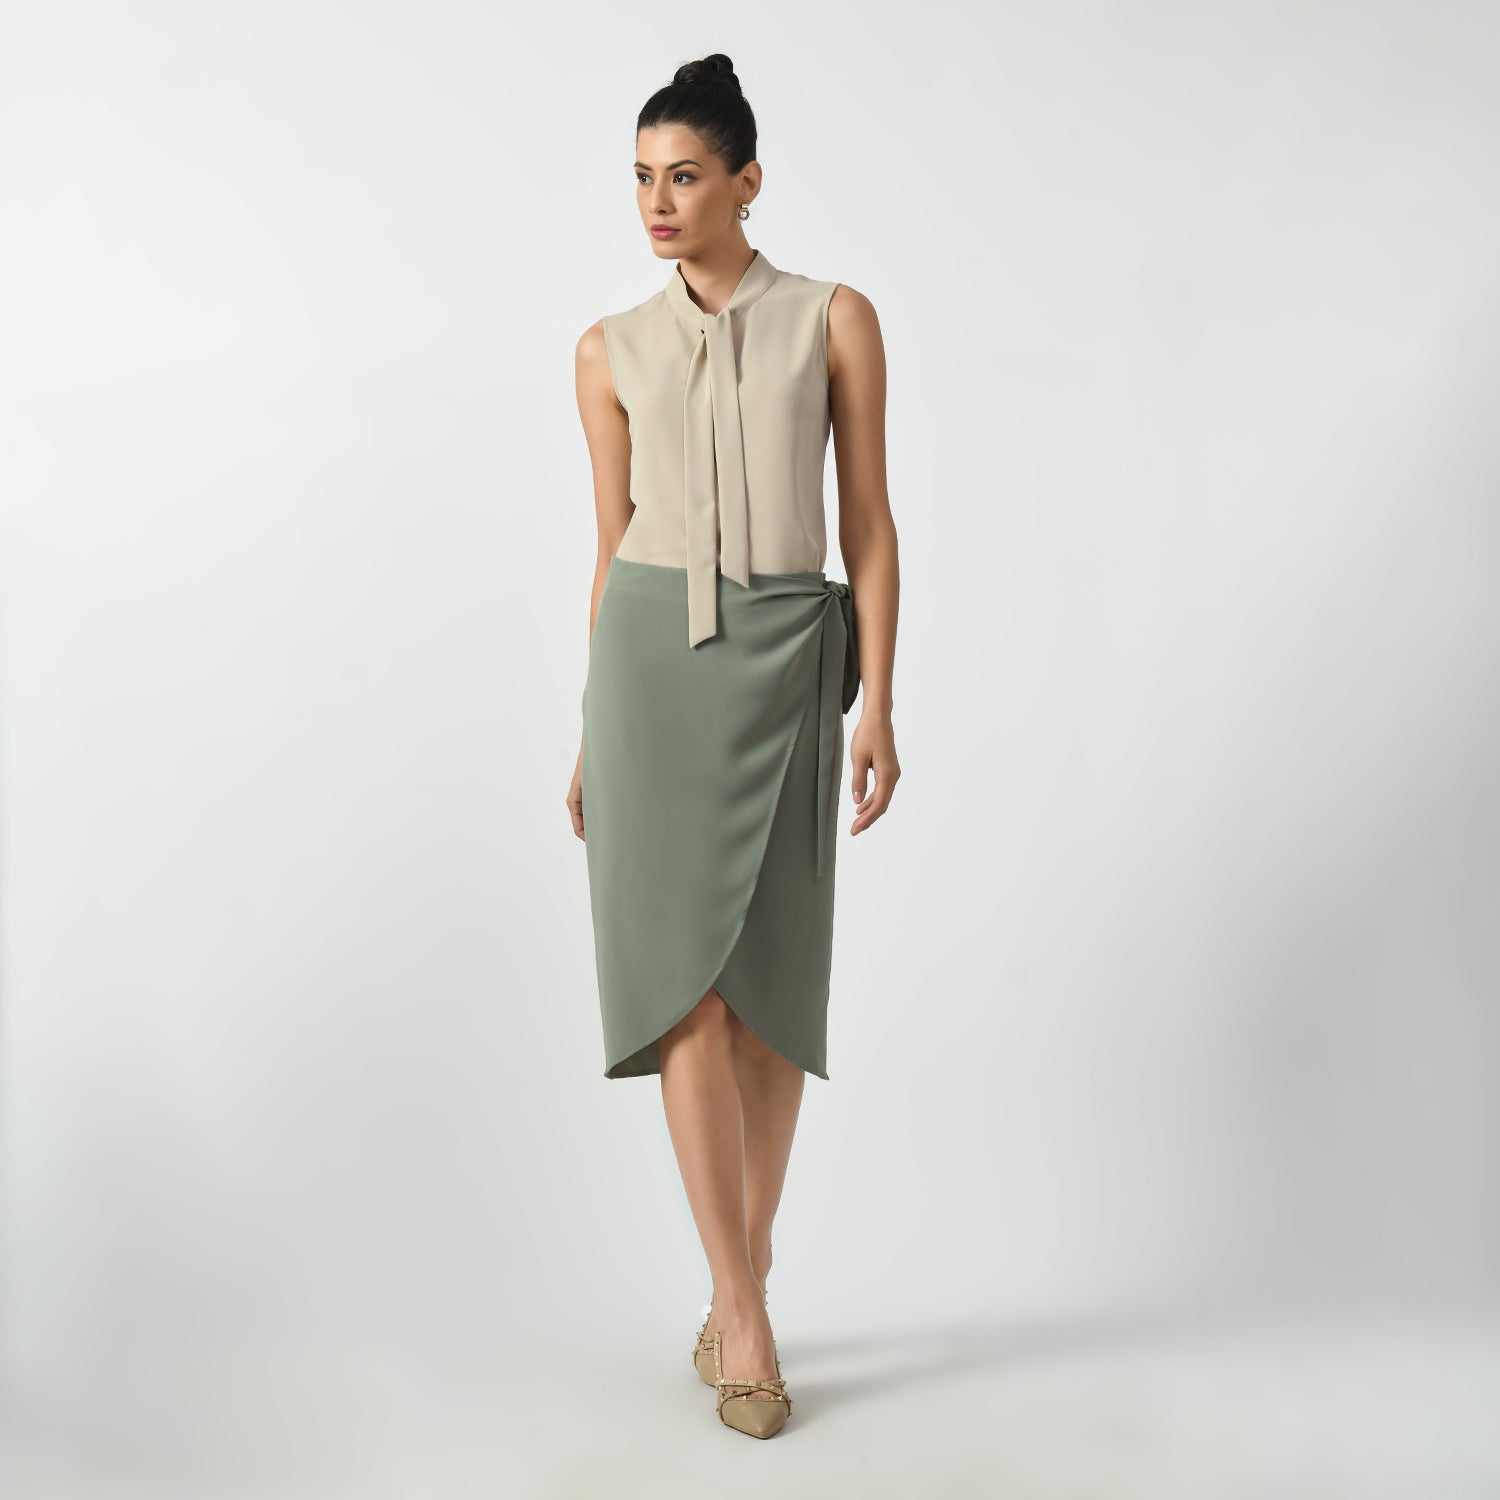 Dusty Green Overlap Skirt With Tie Knot